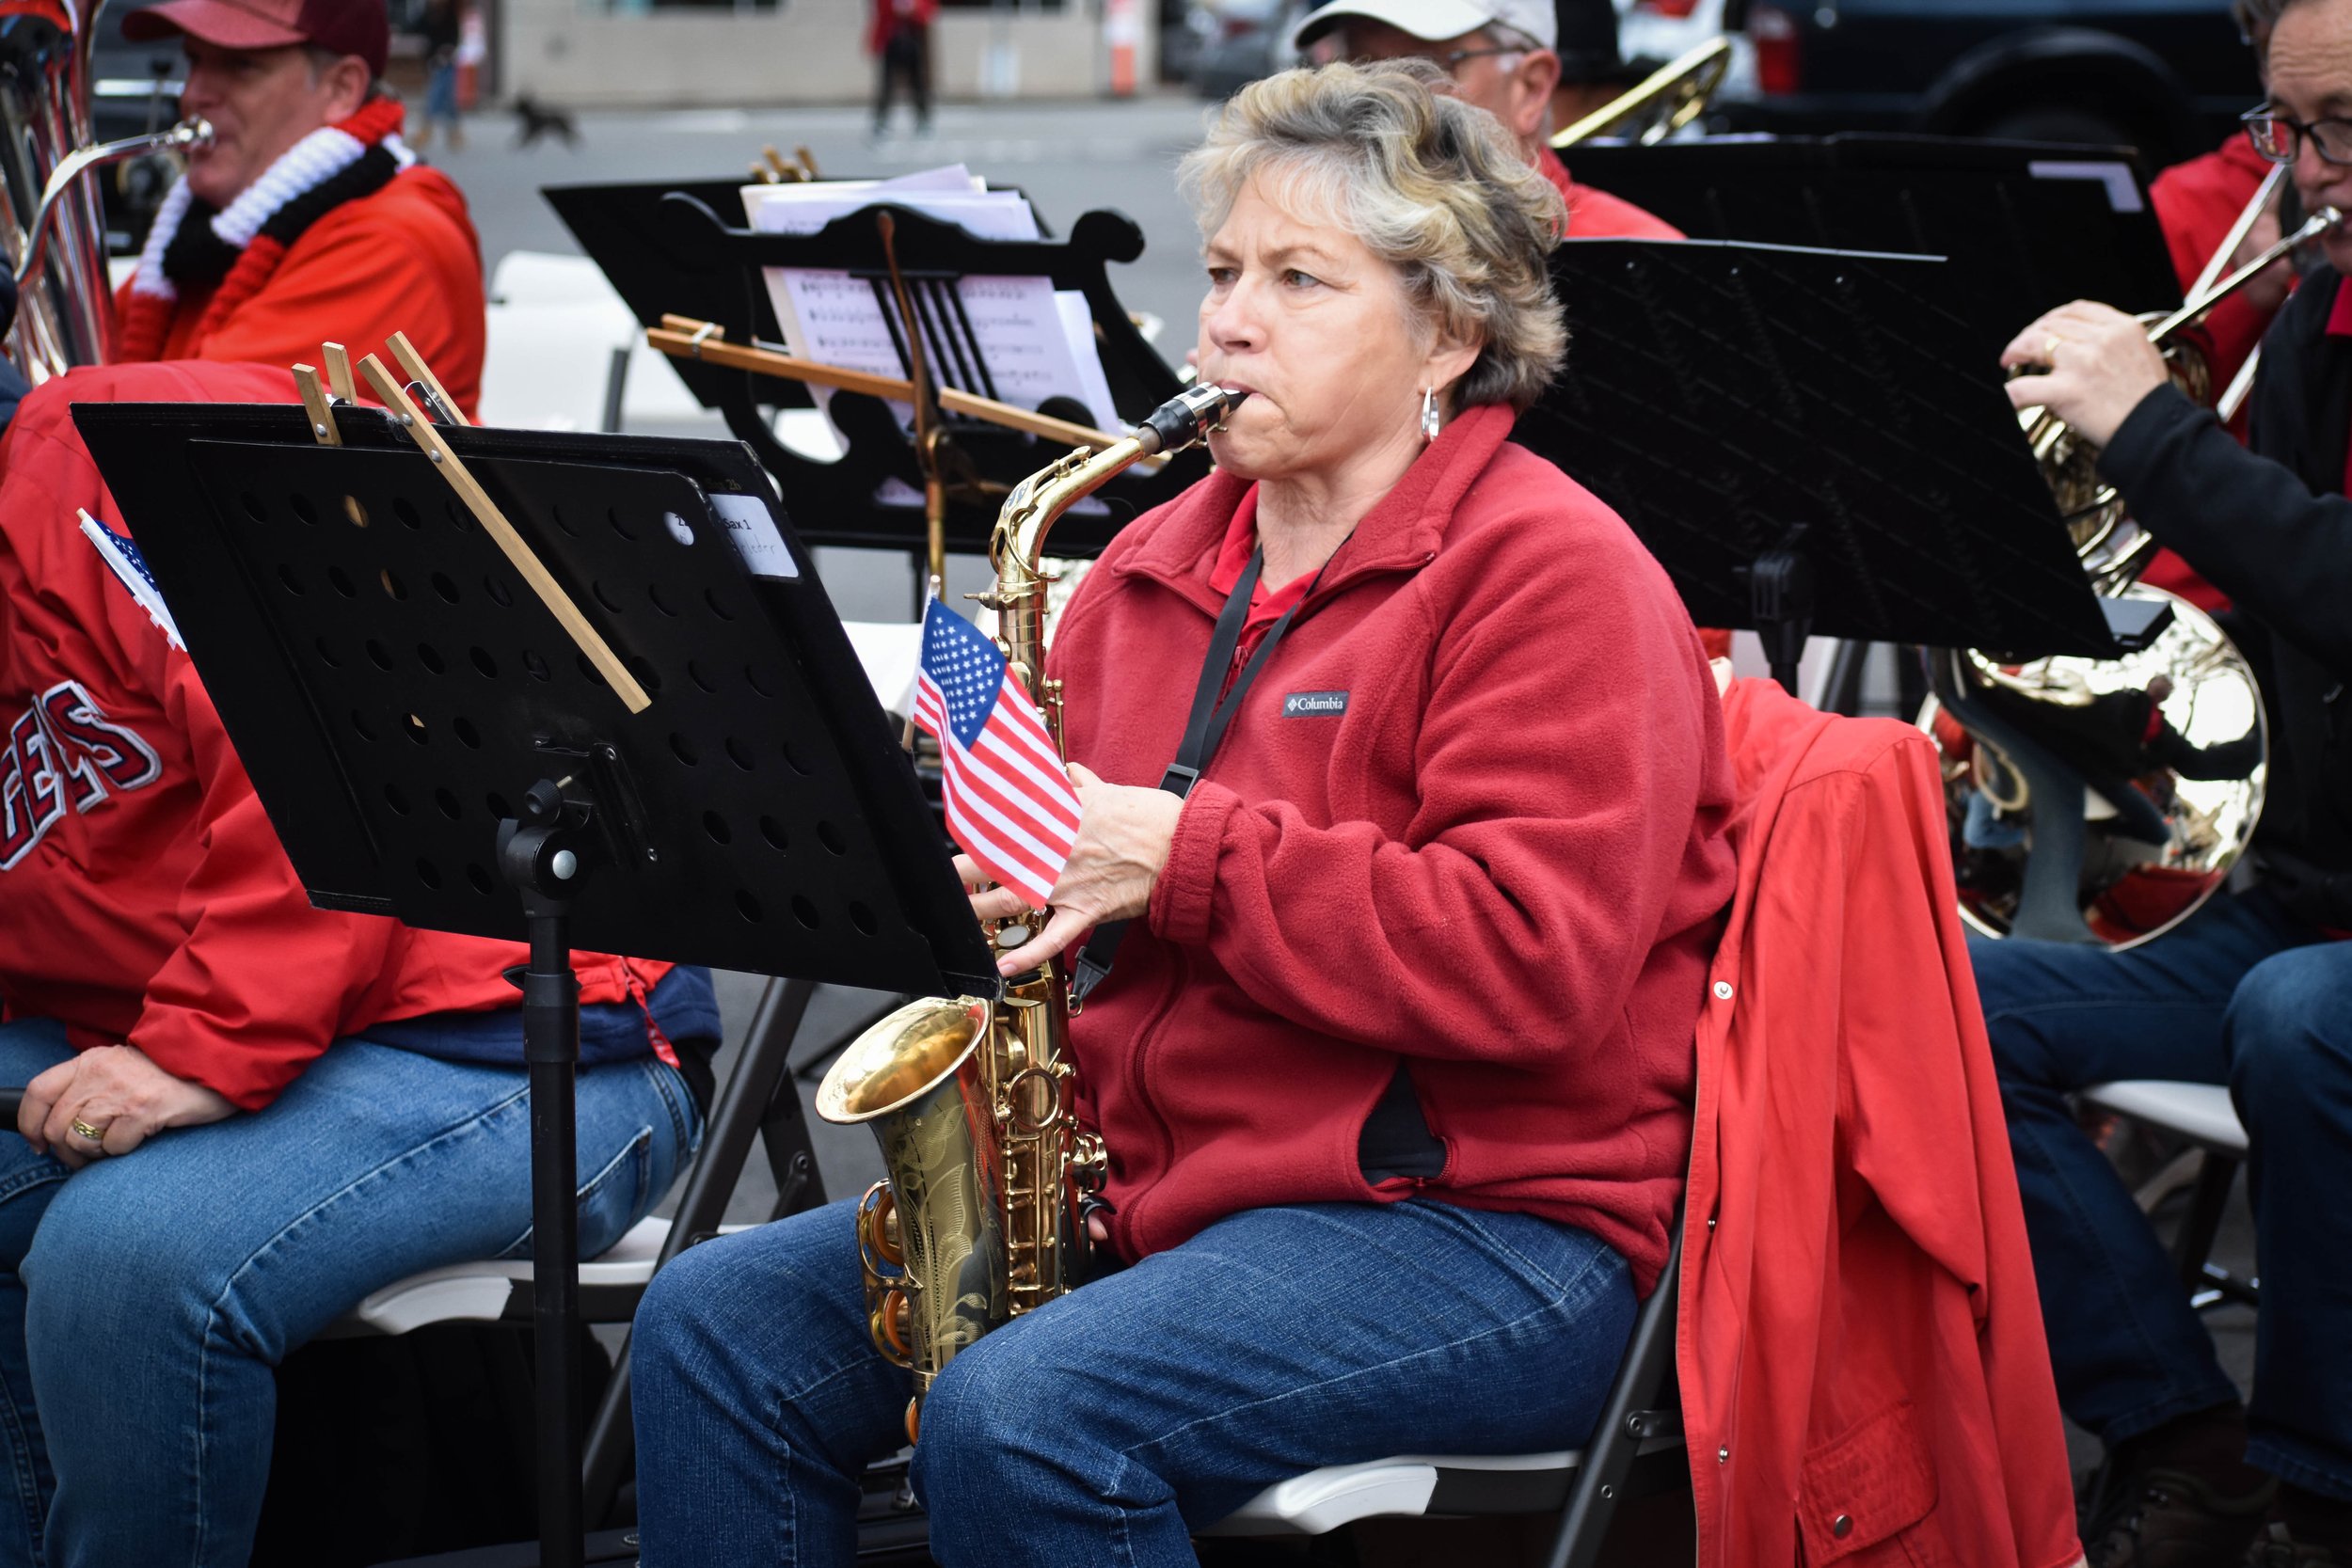 03-04-2023 LCCB Patriots Day concert by Peyton Webster7-16.jpg